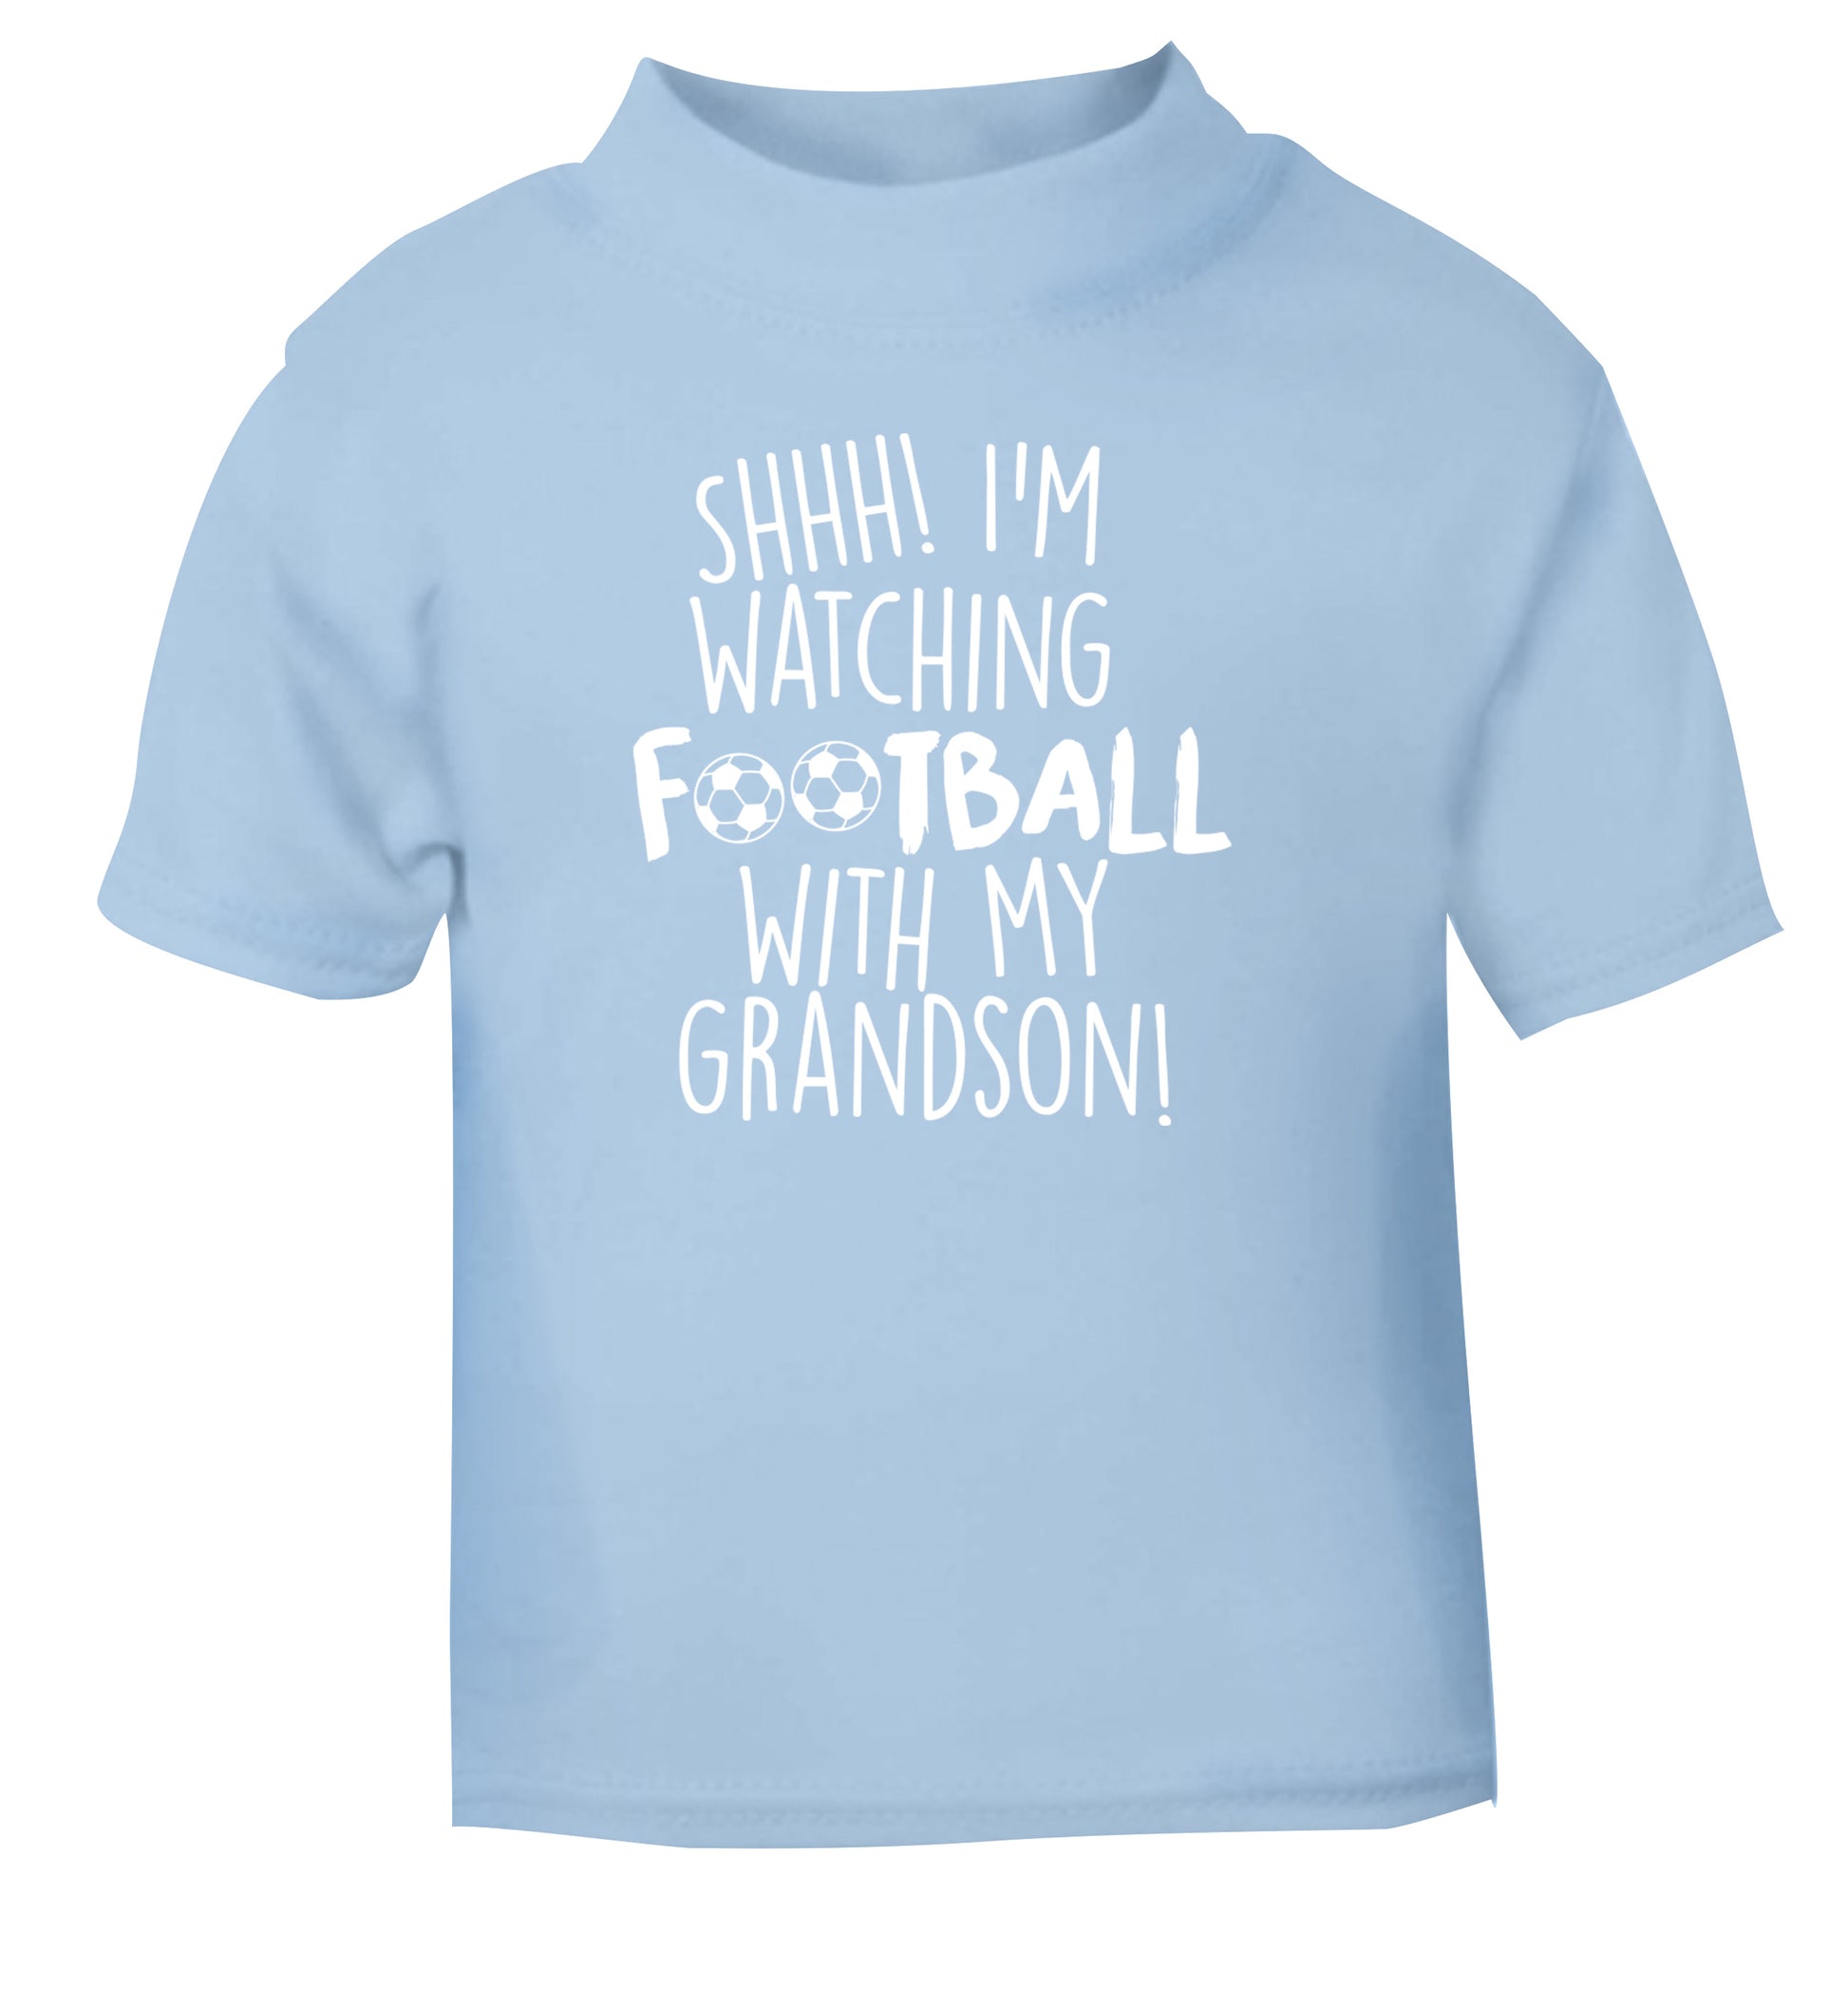 Shhh I'm watching football with my grandson light blue Baby Toddler Tshirt 2 Years